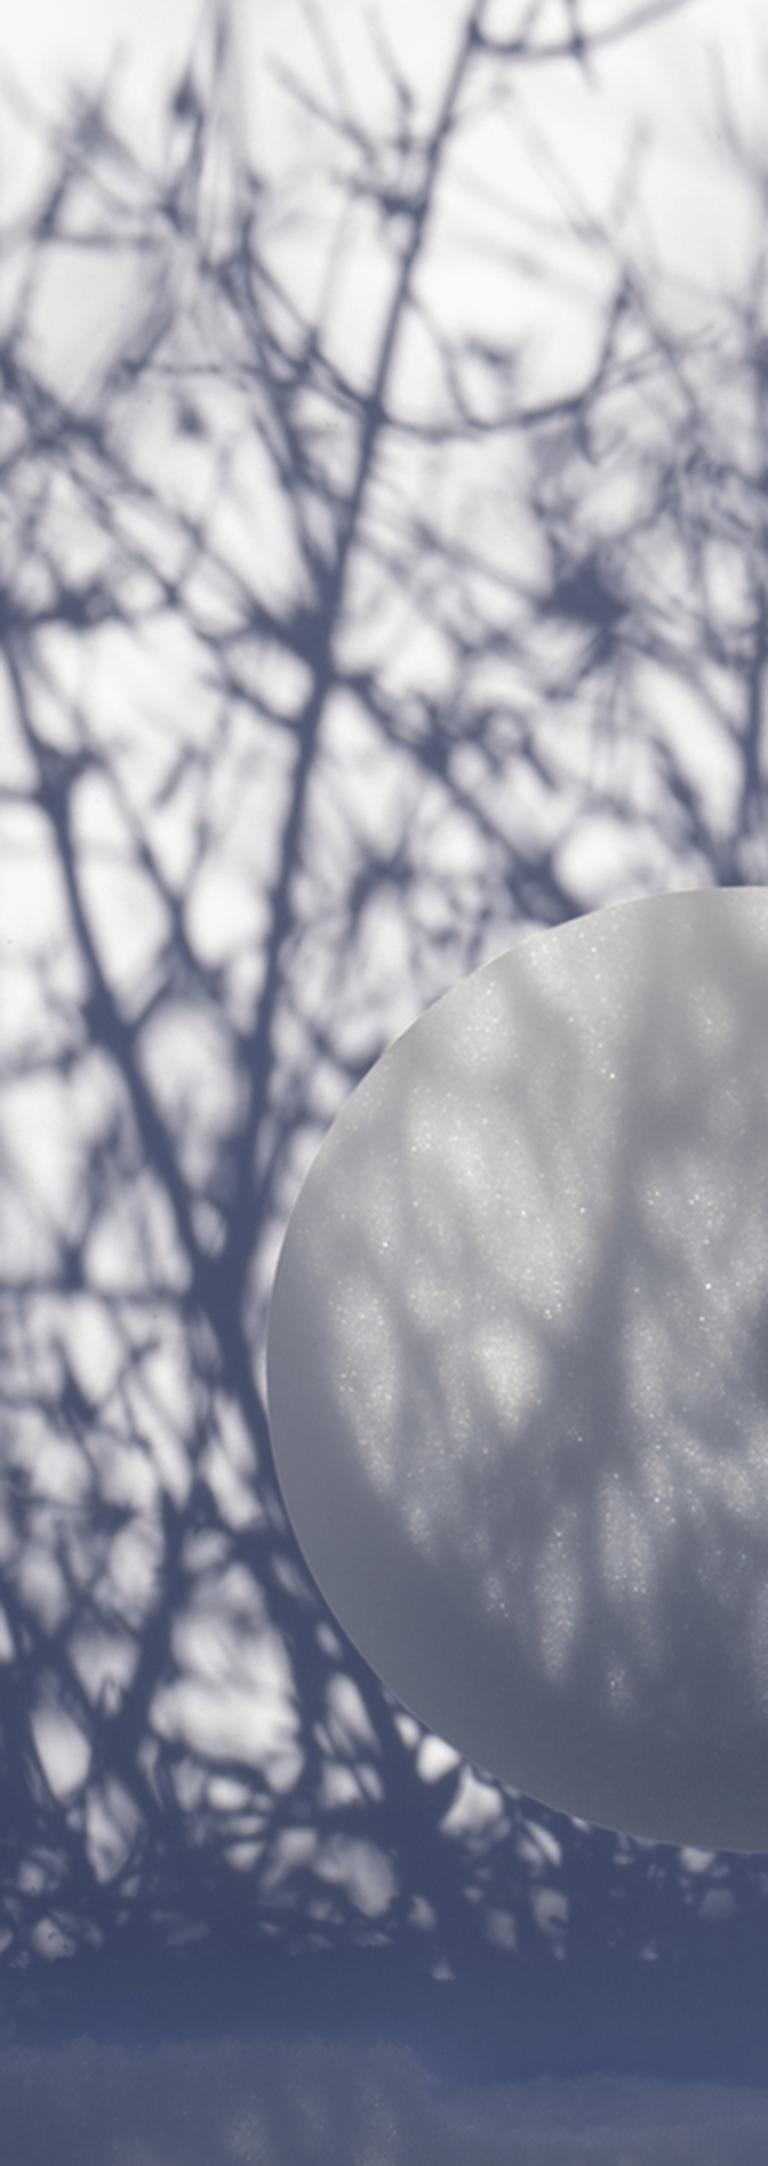 Shadow Legacy no. 2 - Blue & white circle abstract, snow tree branches landscape - Photograph by Brenda Biondo